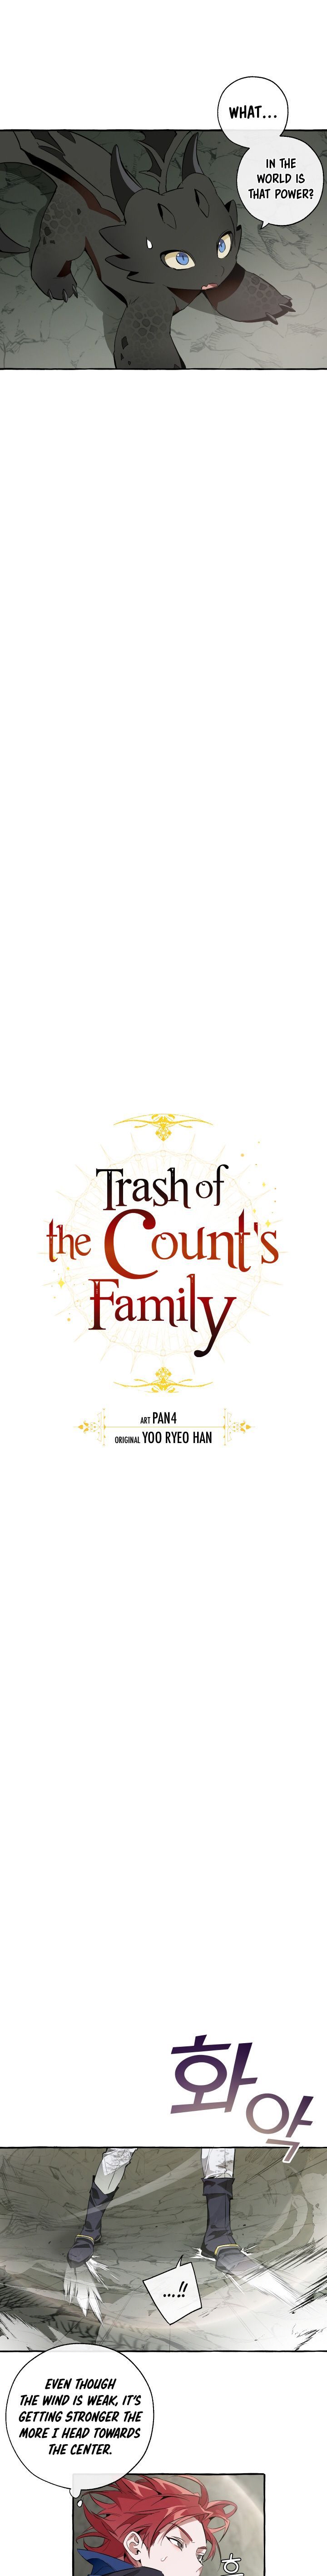 trash_of_the_counts_family_26_5